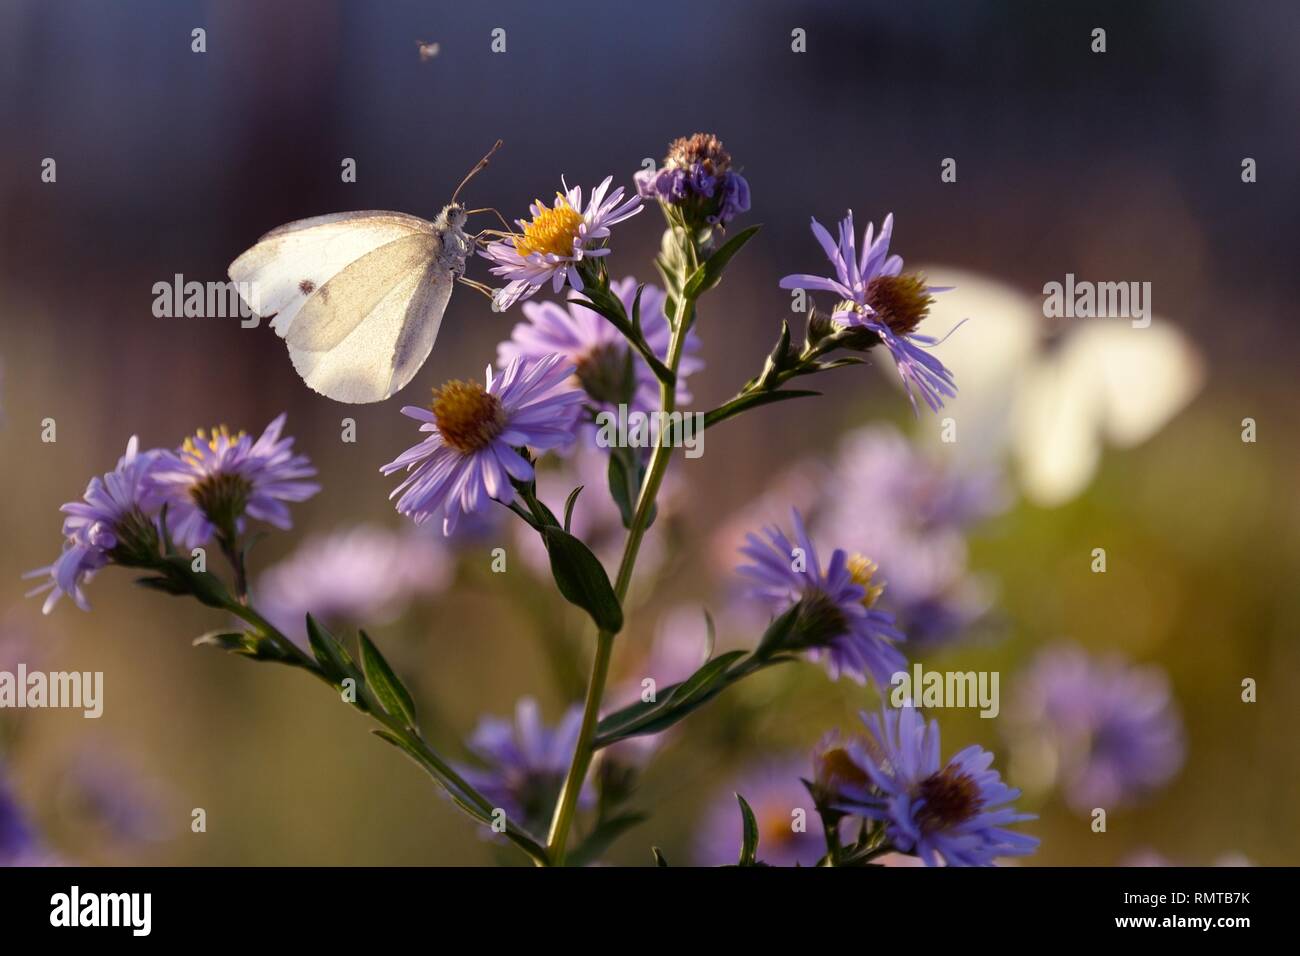 White butterfly sitting on a pale violet flower in spring evening. Stock Photo